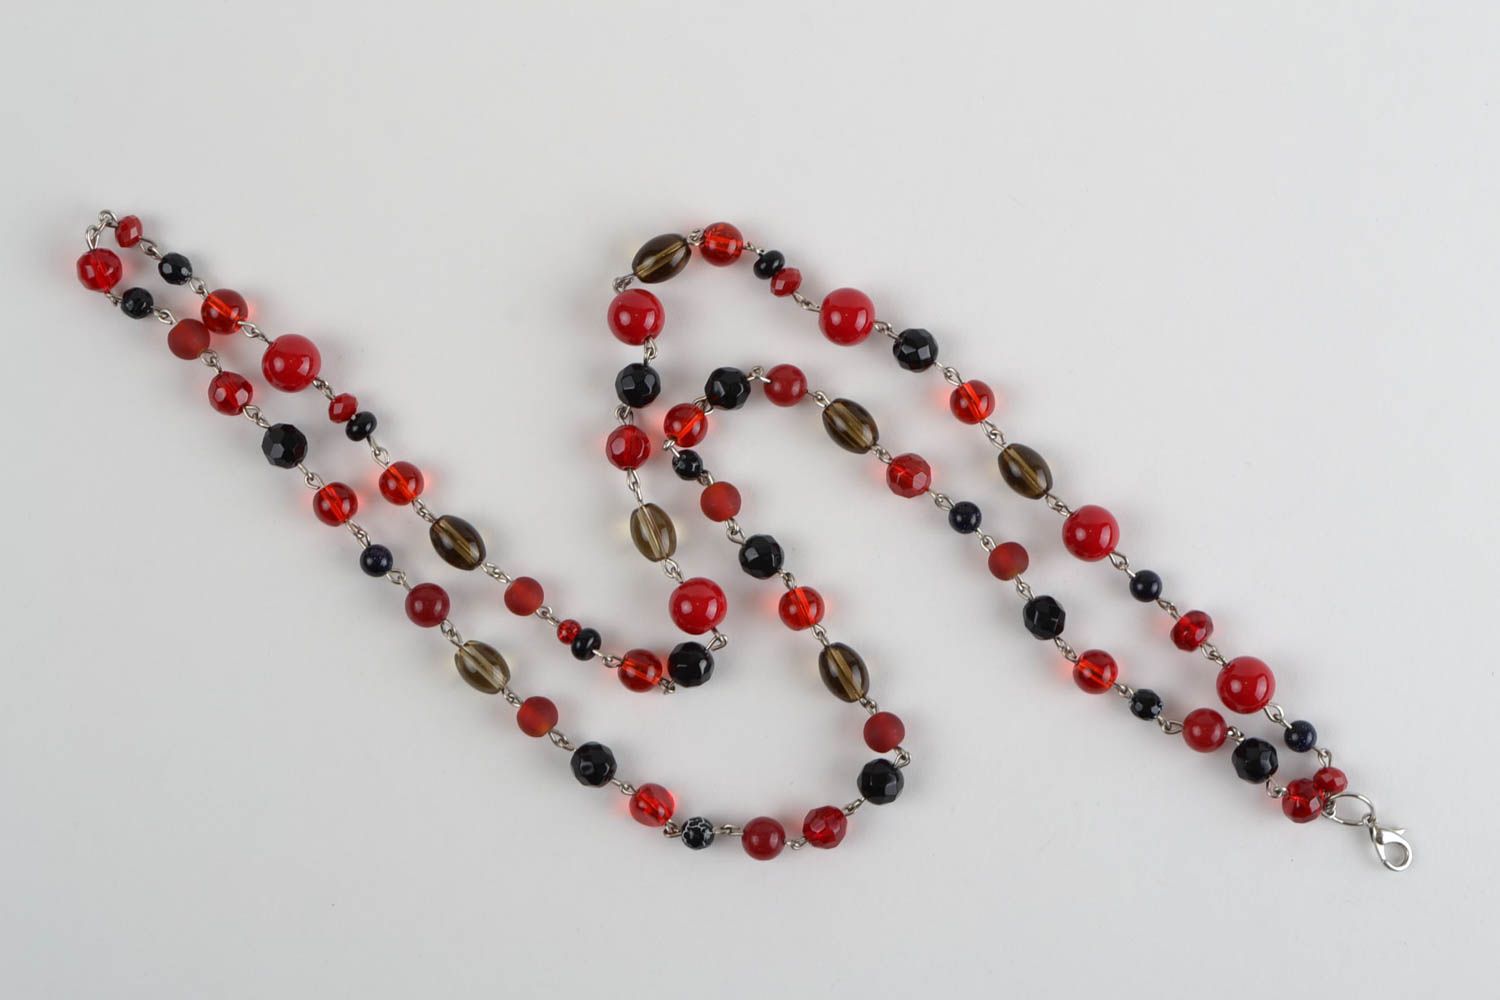 Handmade long women's necklace with natural stone and glass beads red and black photo 3